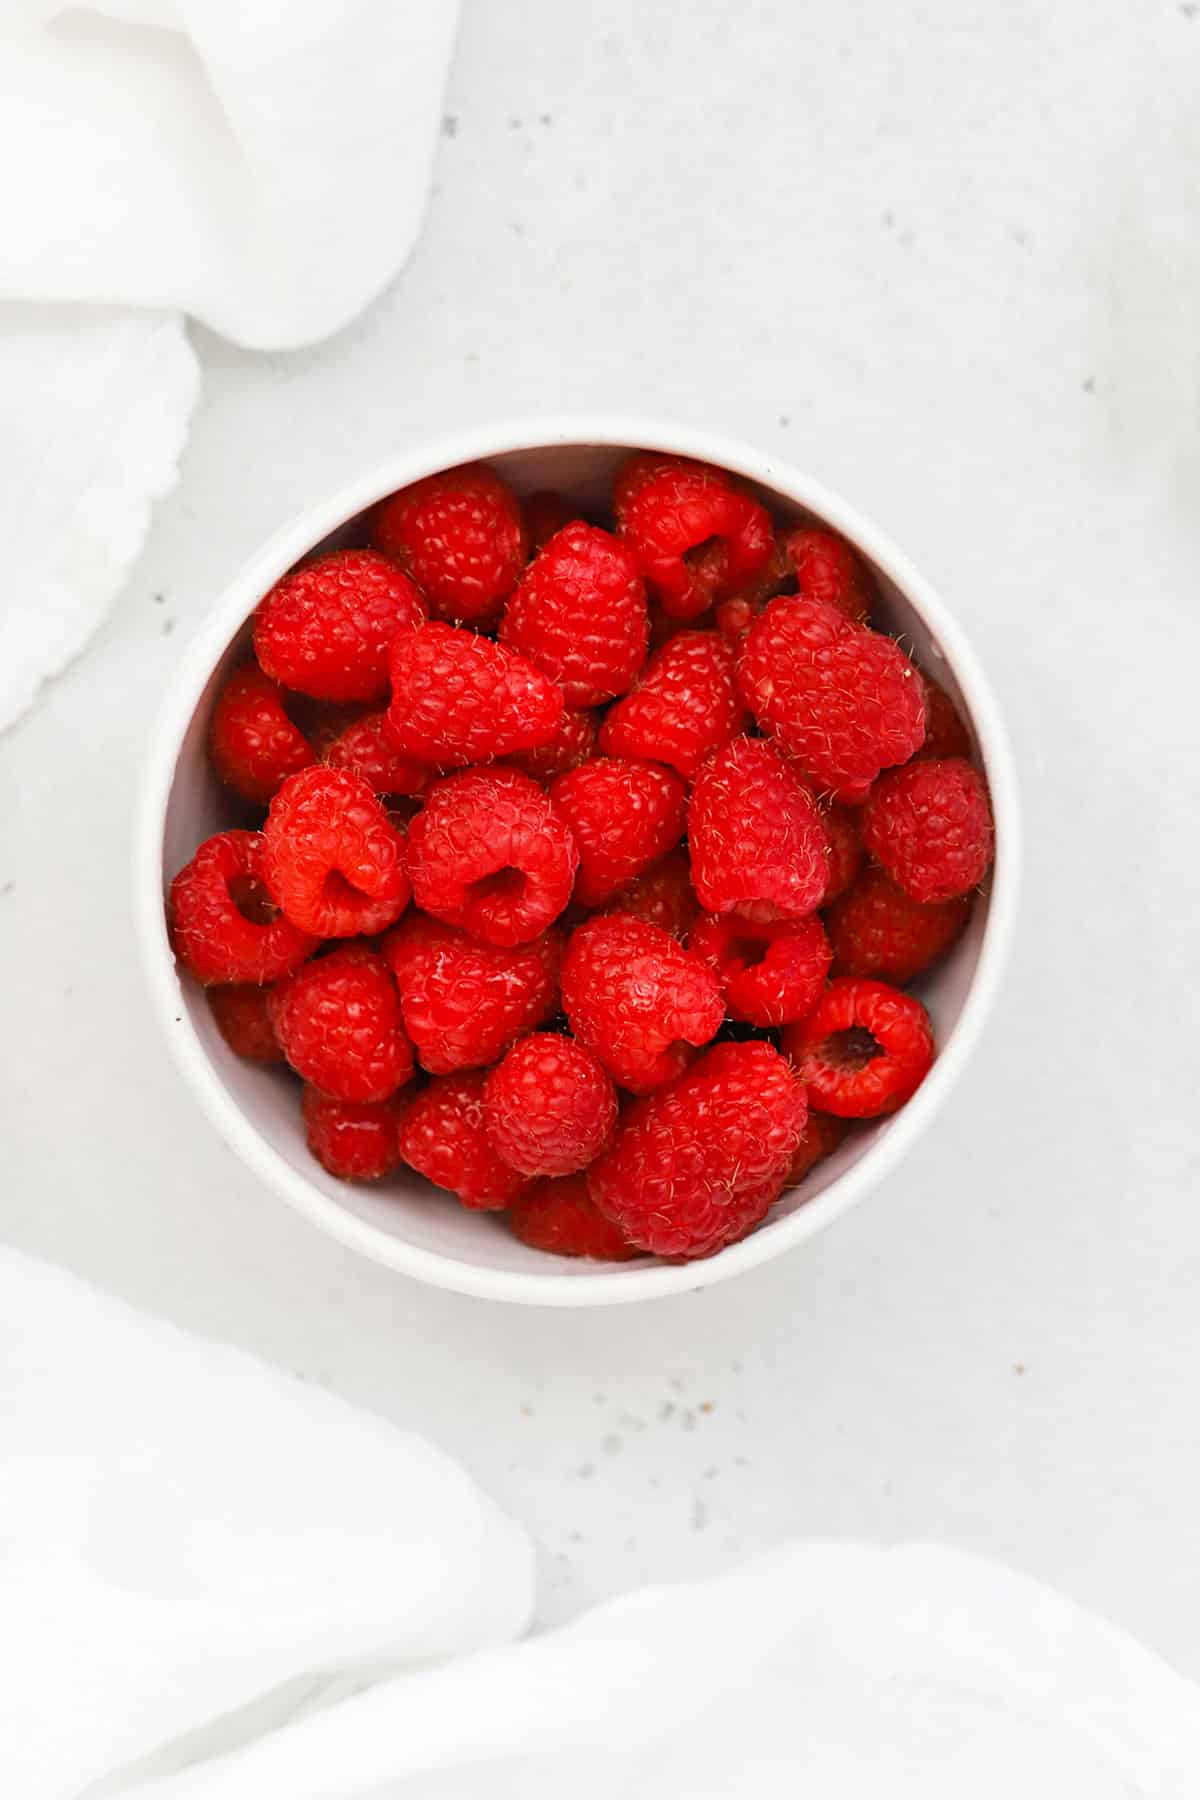 Overhead view of a bowl of red, ripe raspberries